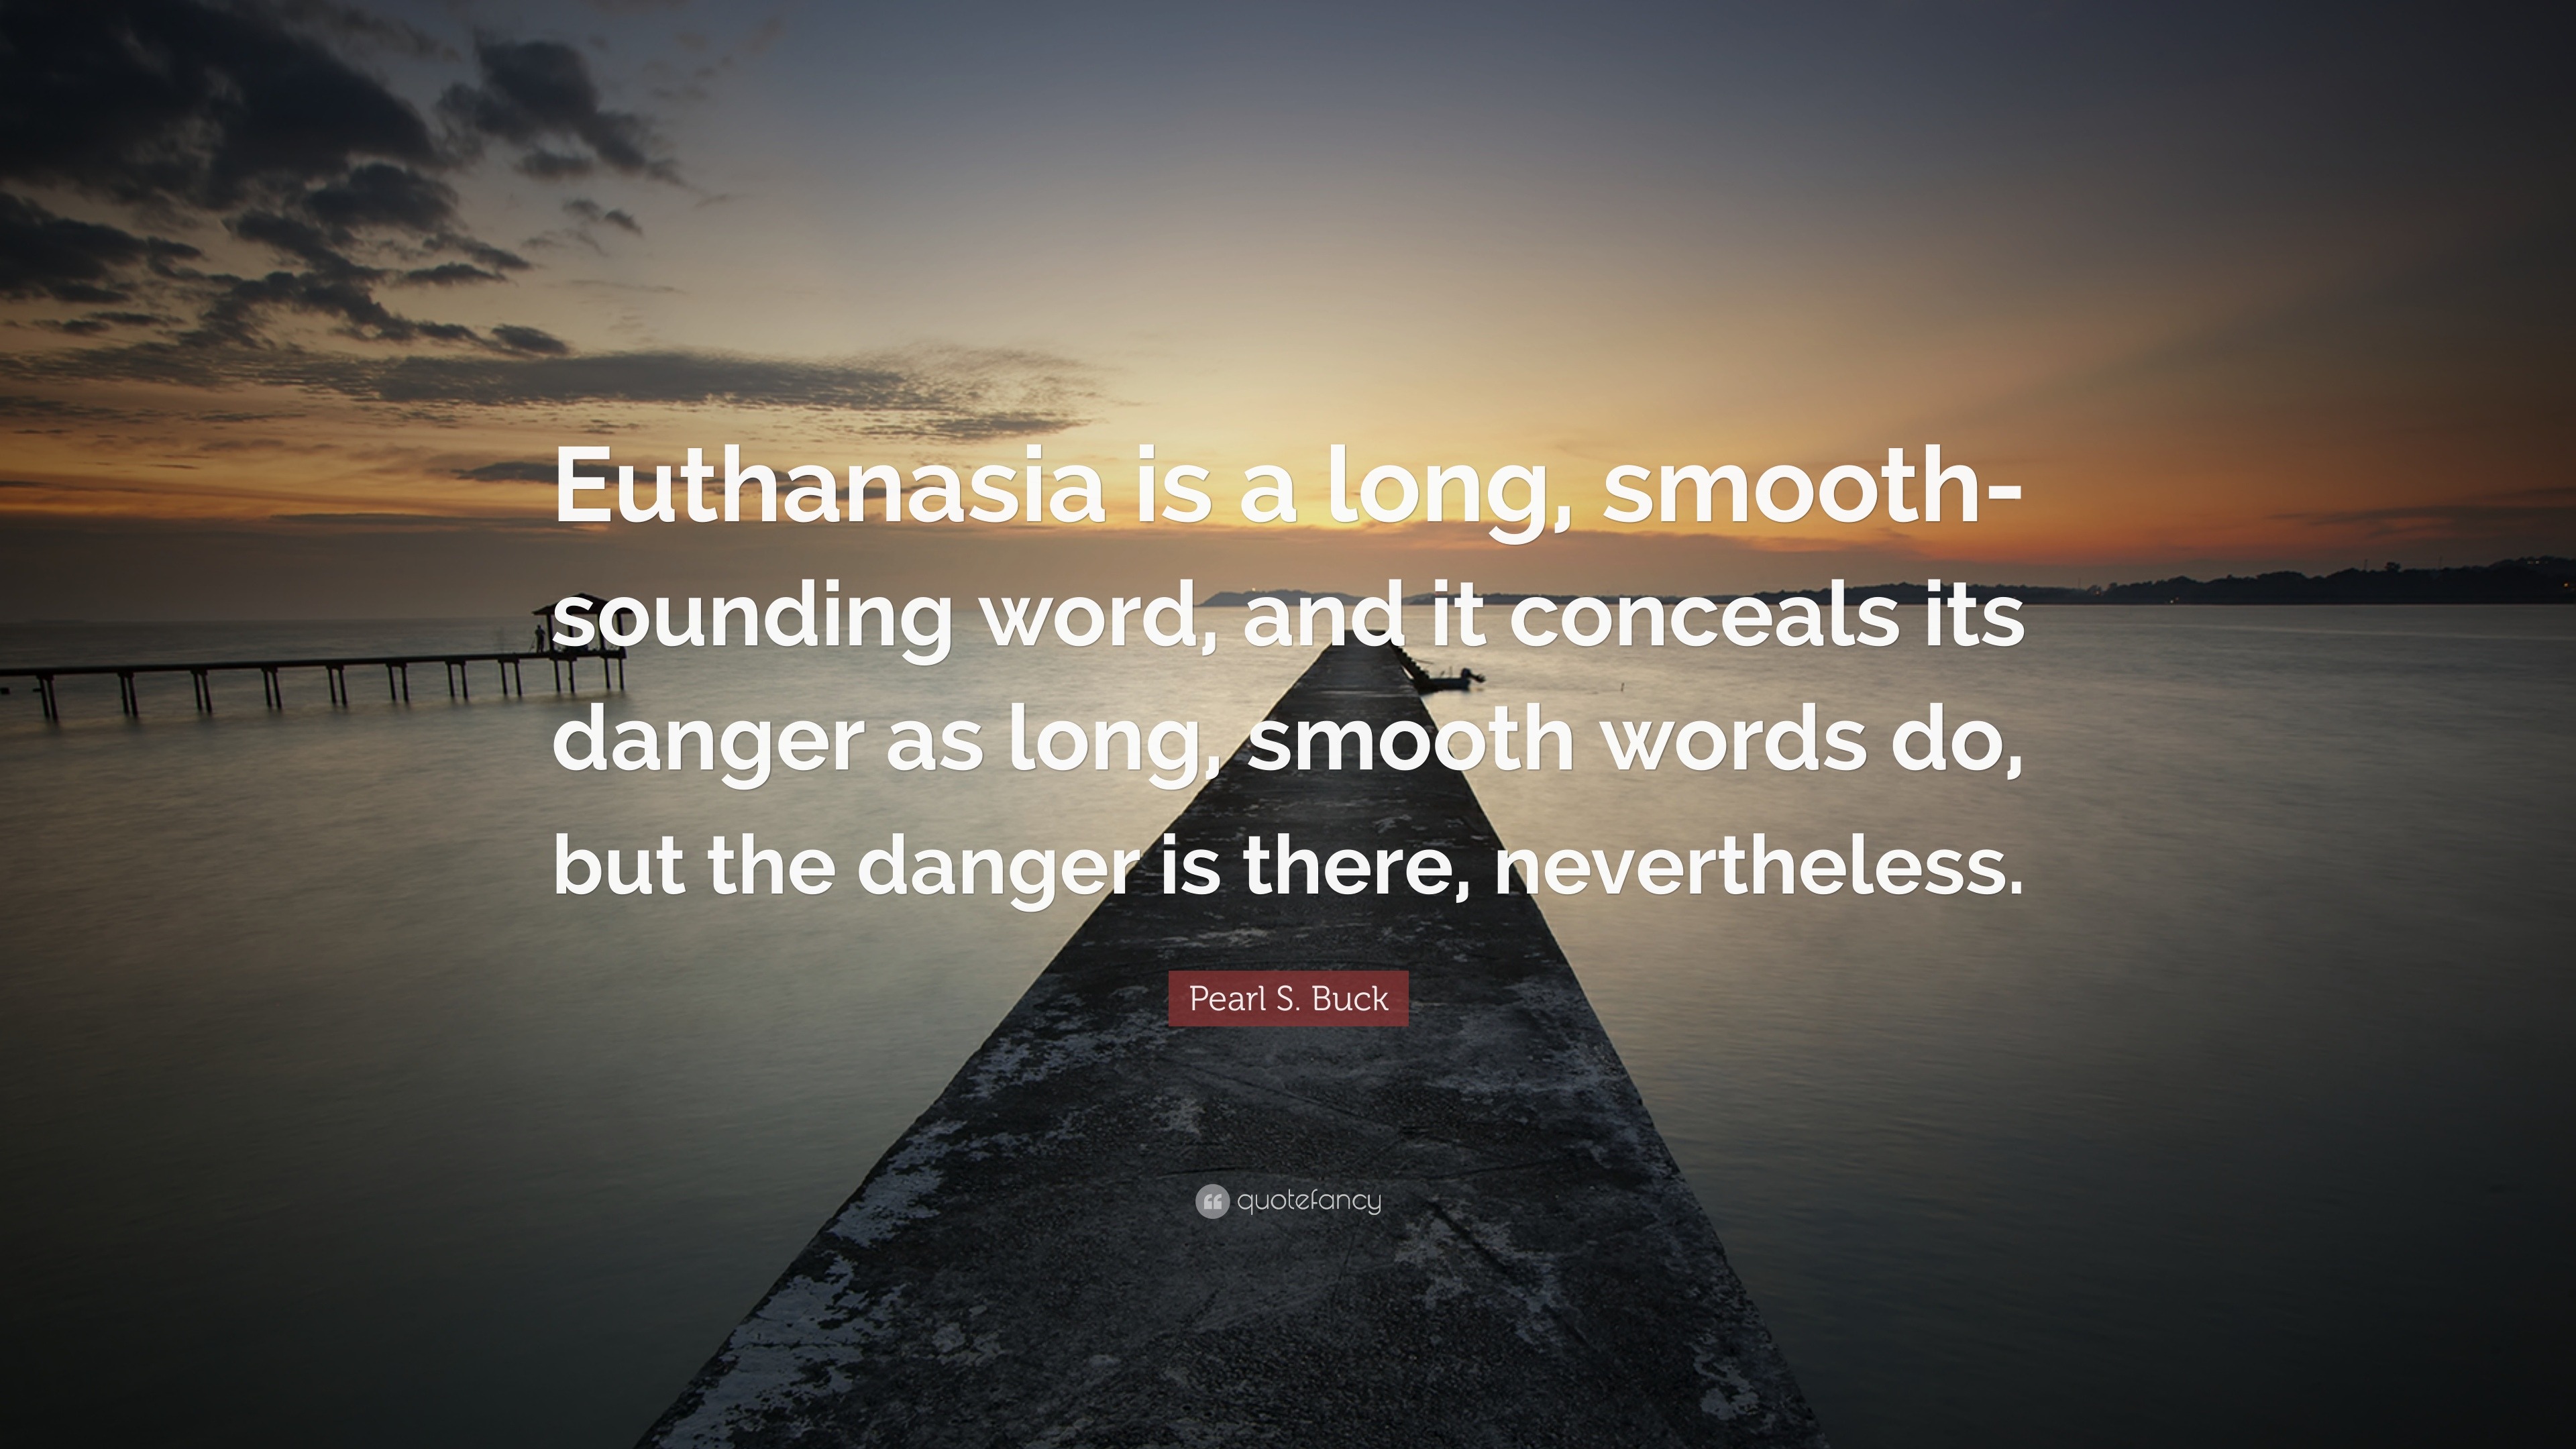 Pearl S. Buck Quote: “Euthanasia is a long, smooth-sounding word, and